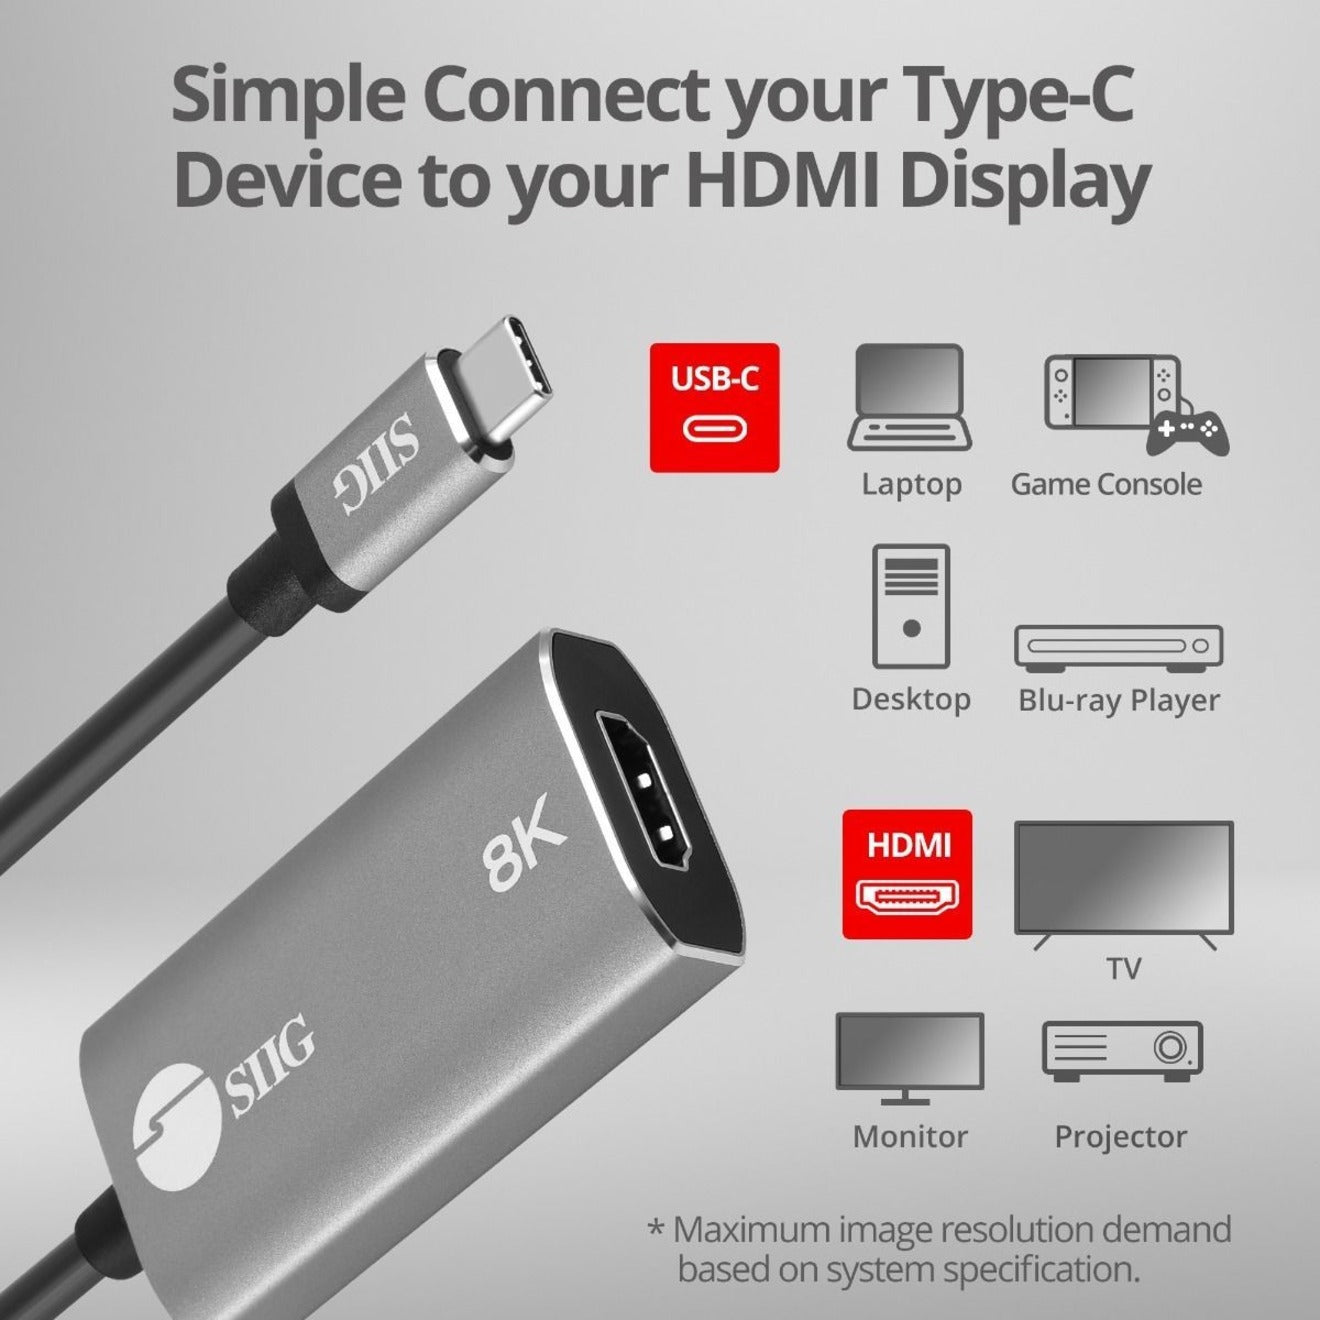 SIIG CB-TC0L11-S1 USB-C to HDMI Adapter - 8K, Reversible, Plug and Play, Space Gray